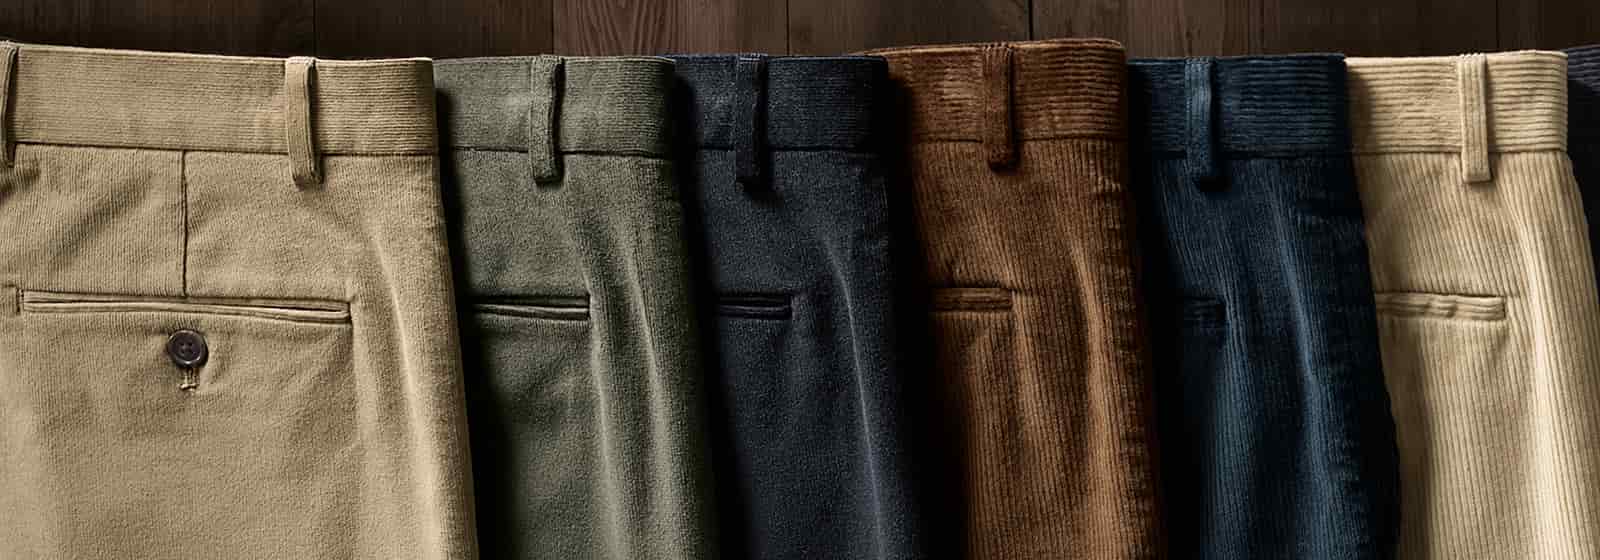 Are Men's Corduroy Pants in Style?